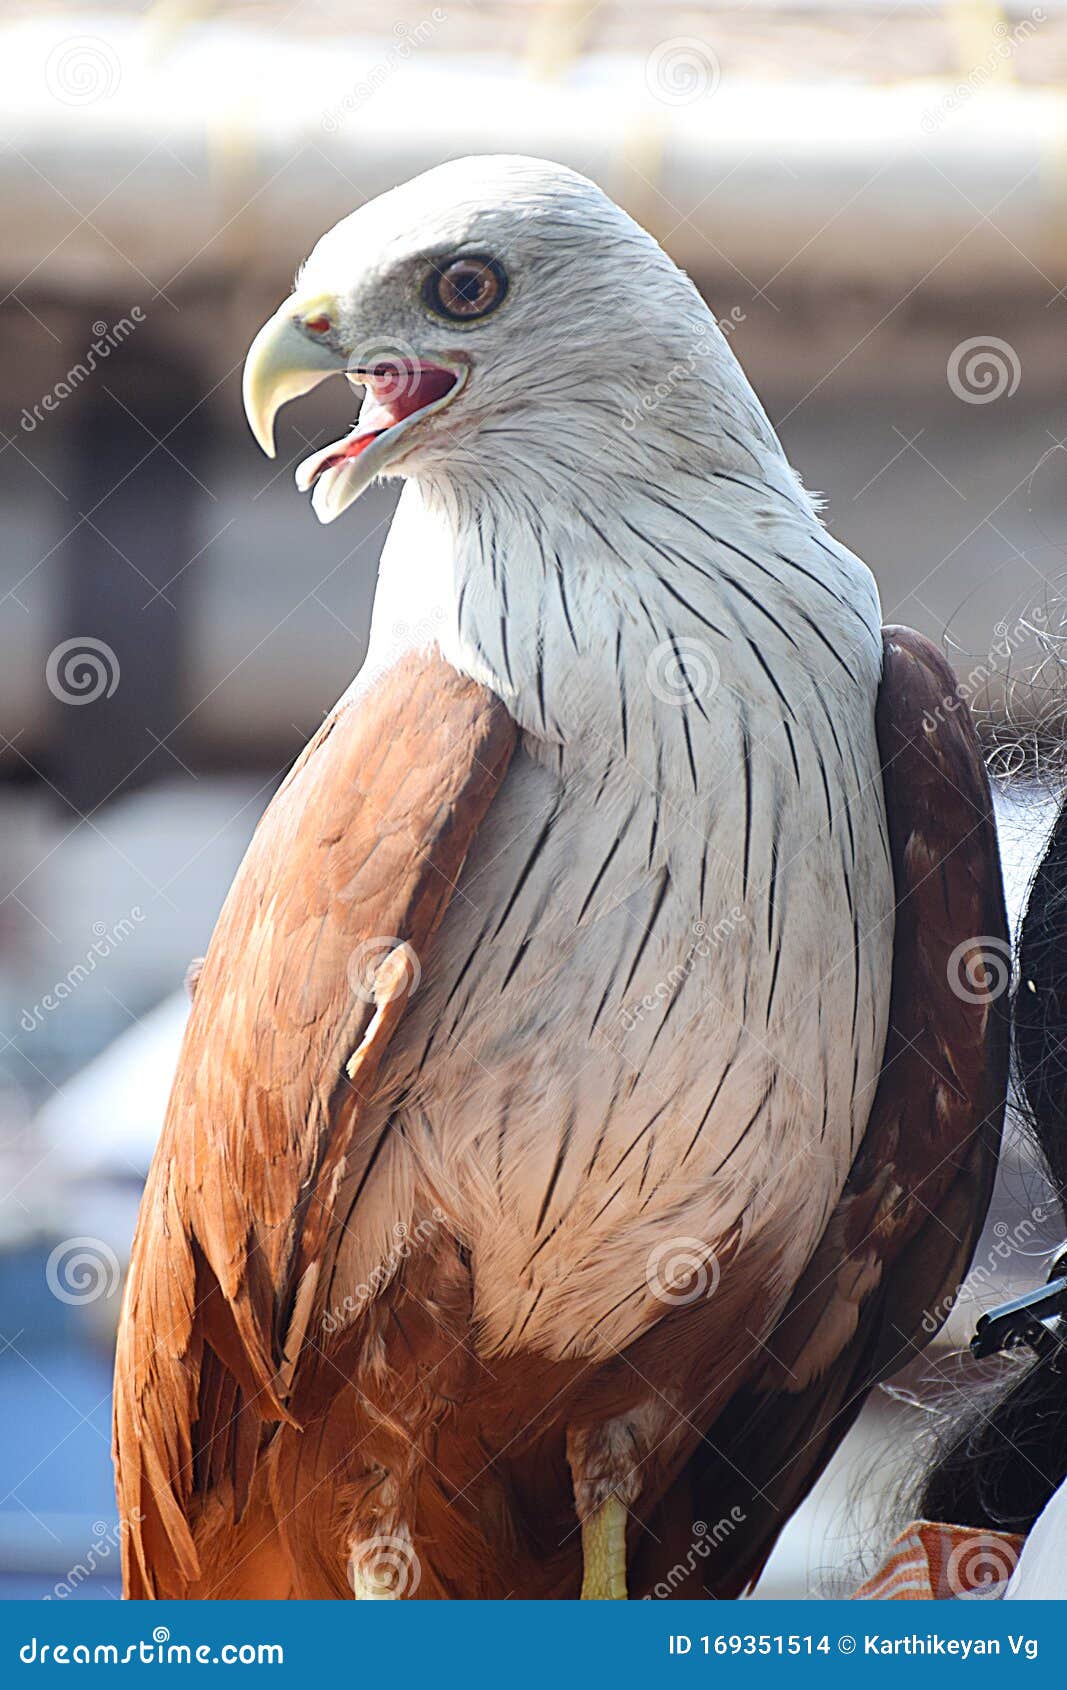 https://thumbs.dreamstime.com/z/eagle-eyes-sharp-face-to-eye-tongue-out-shot-blurred-background-169351514.jpg